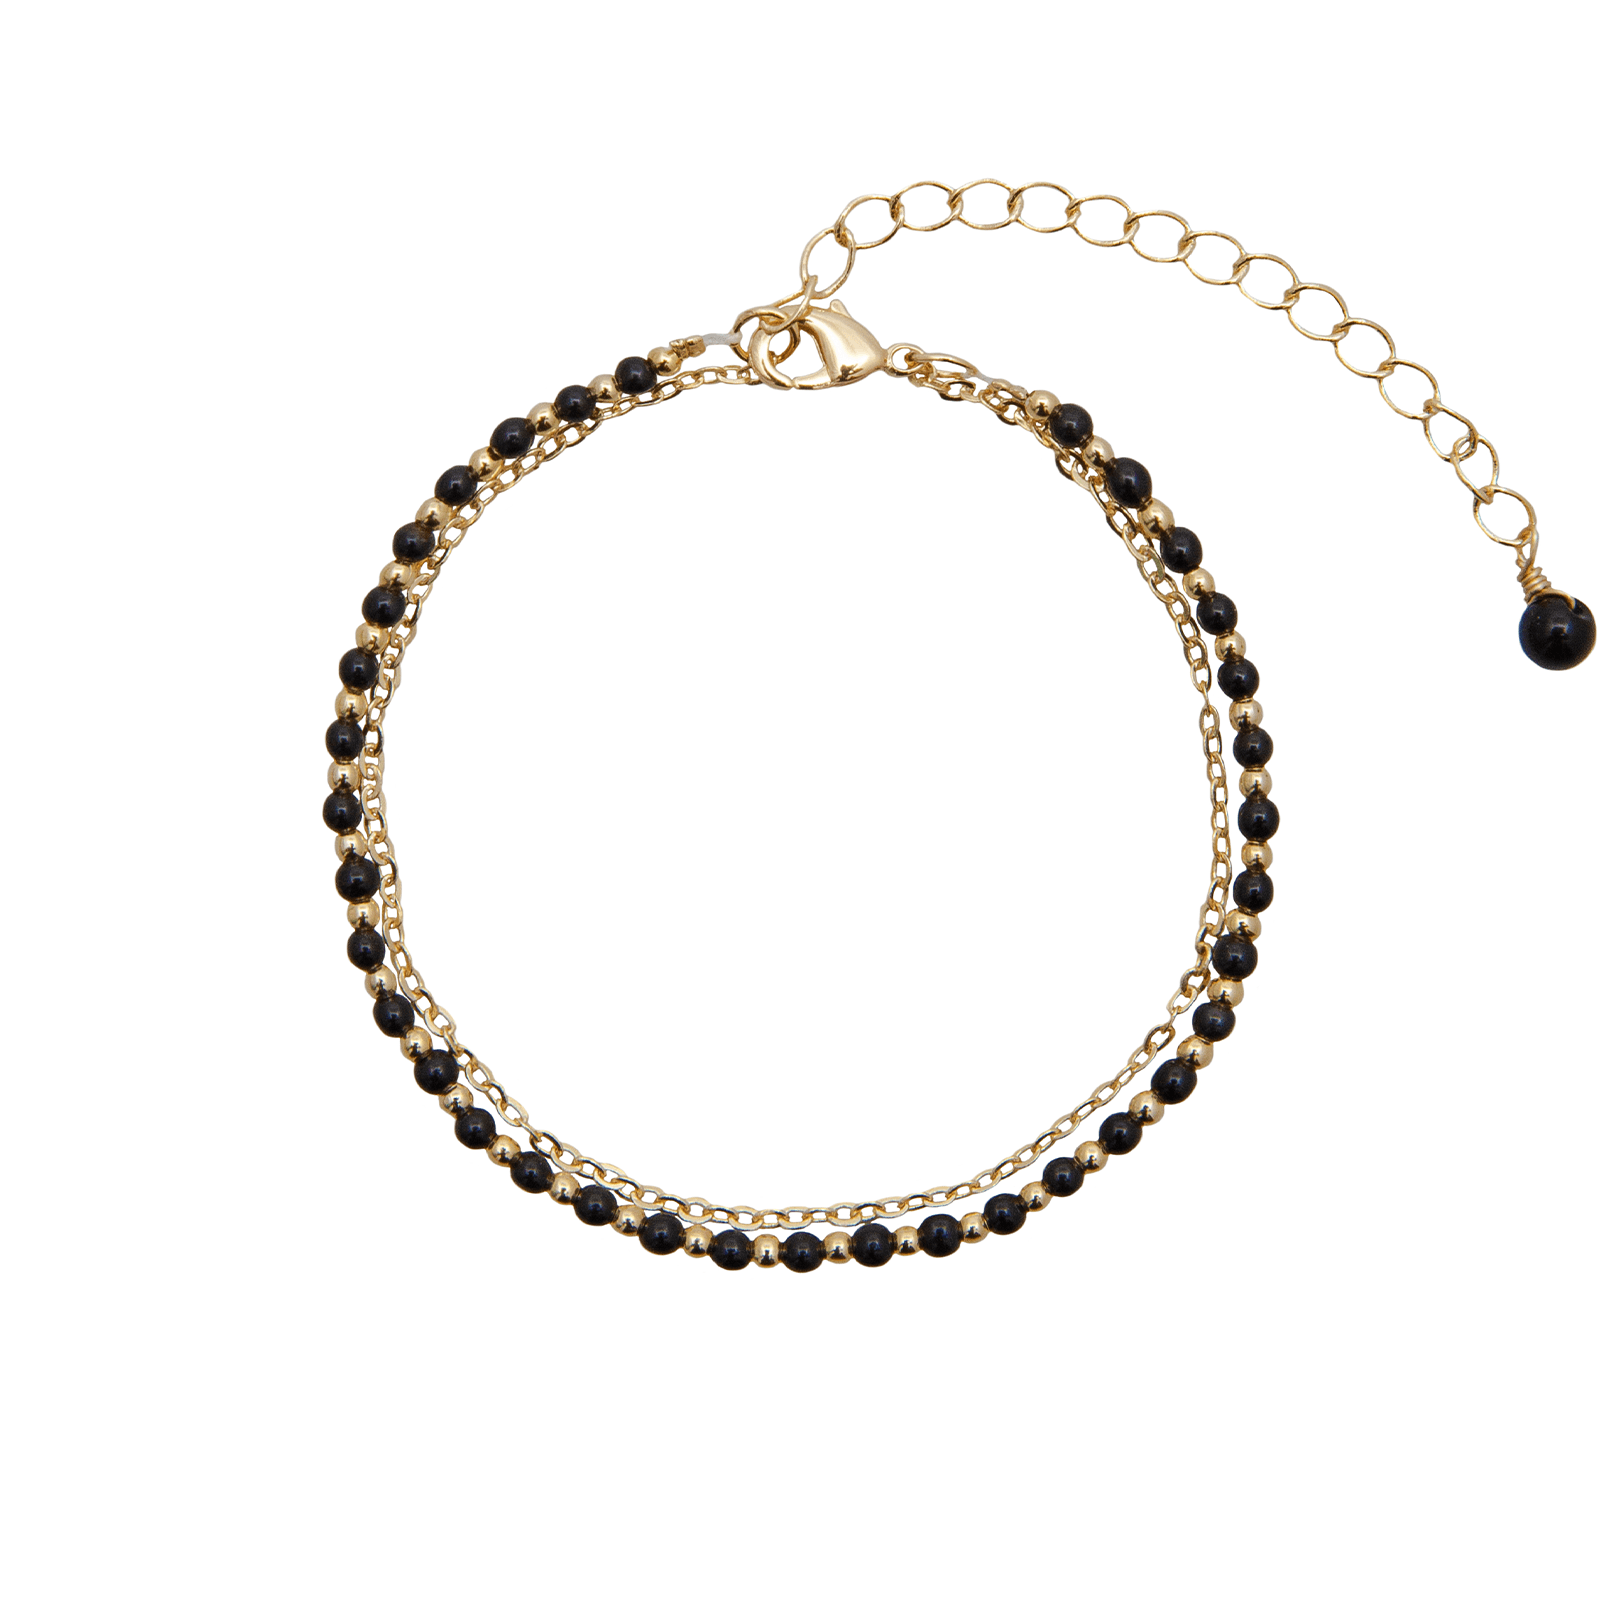 2mm onyx stone and gold bead healing bracelet with an attached gold chain bracelet